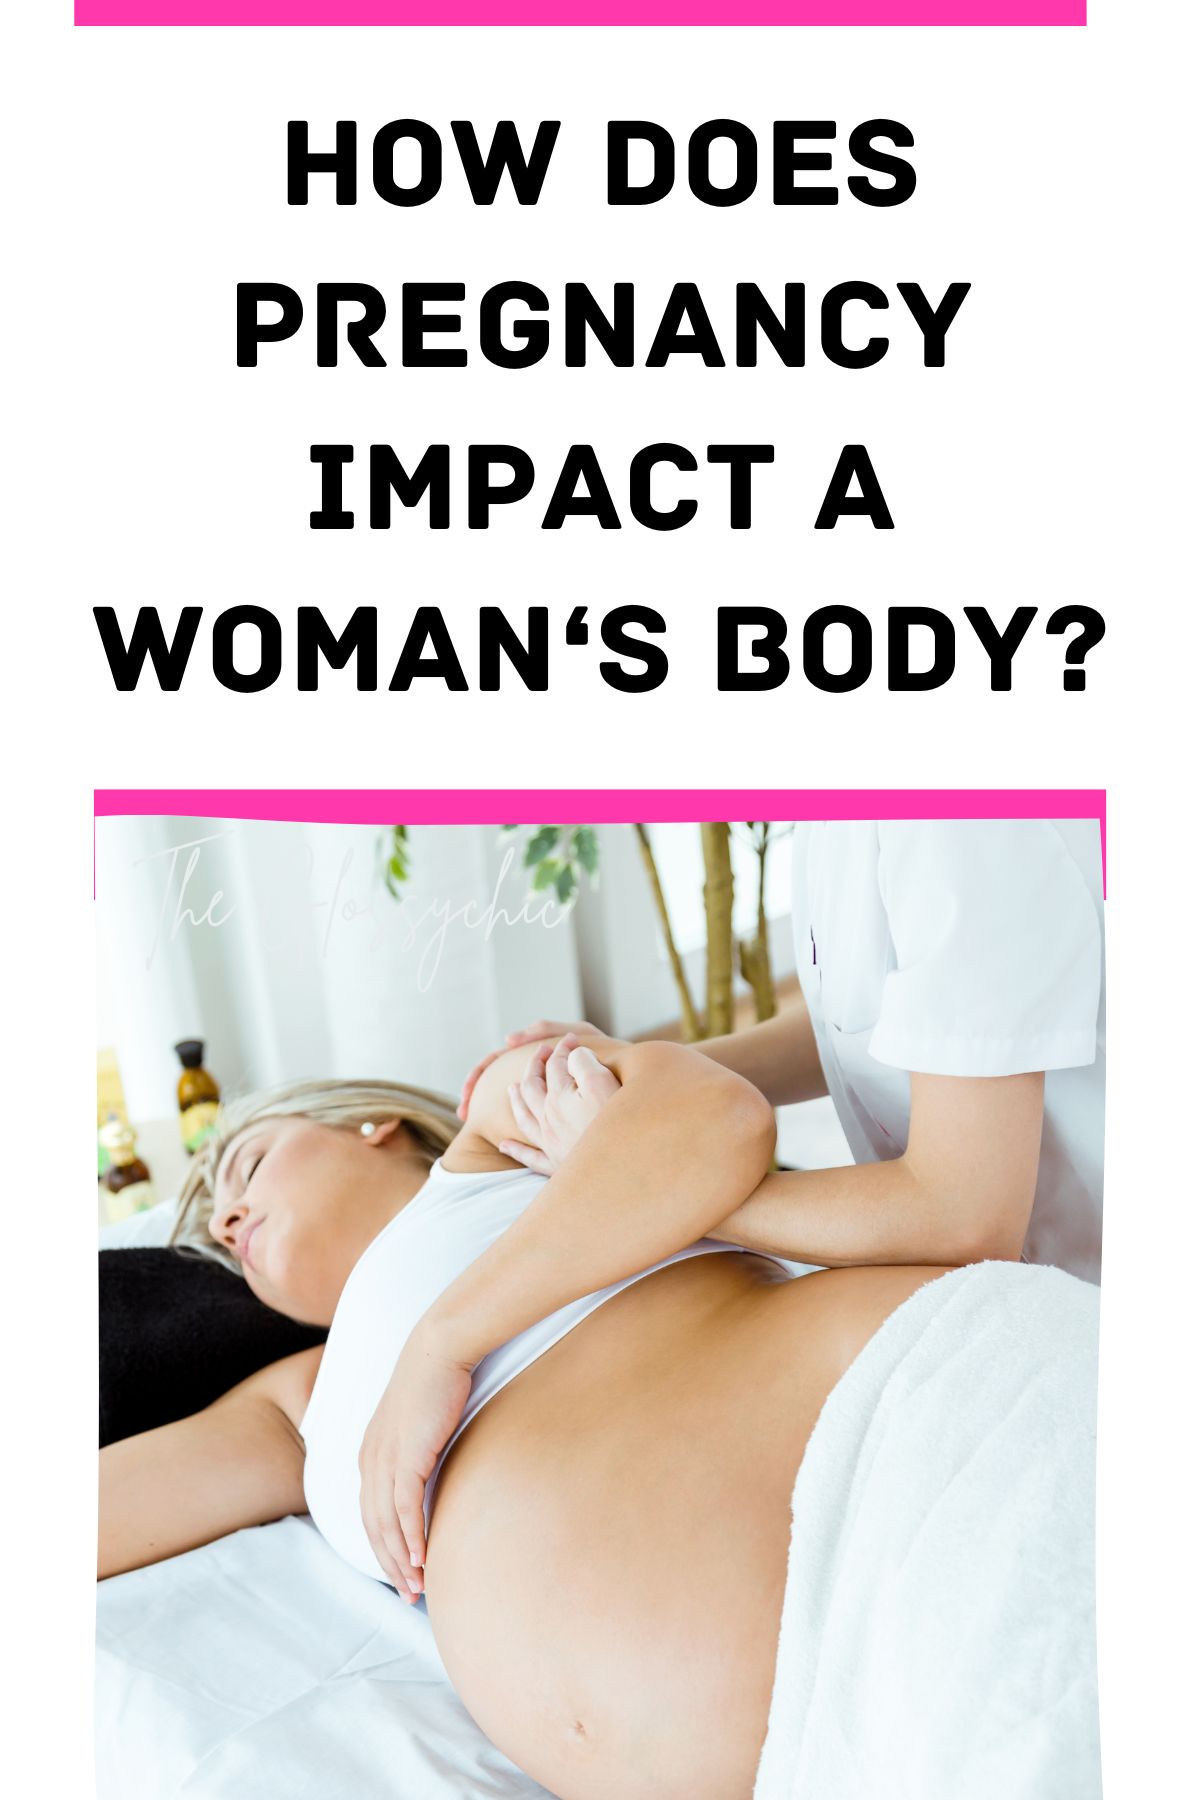 How Does Pregnancy Impact A Woman‘s Body?